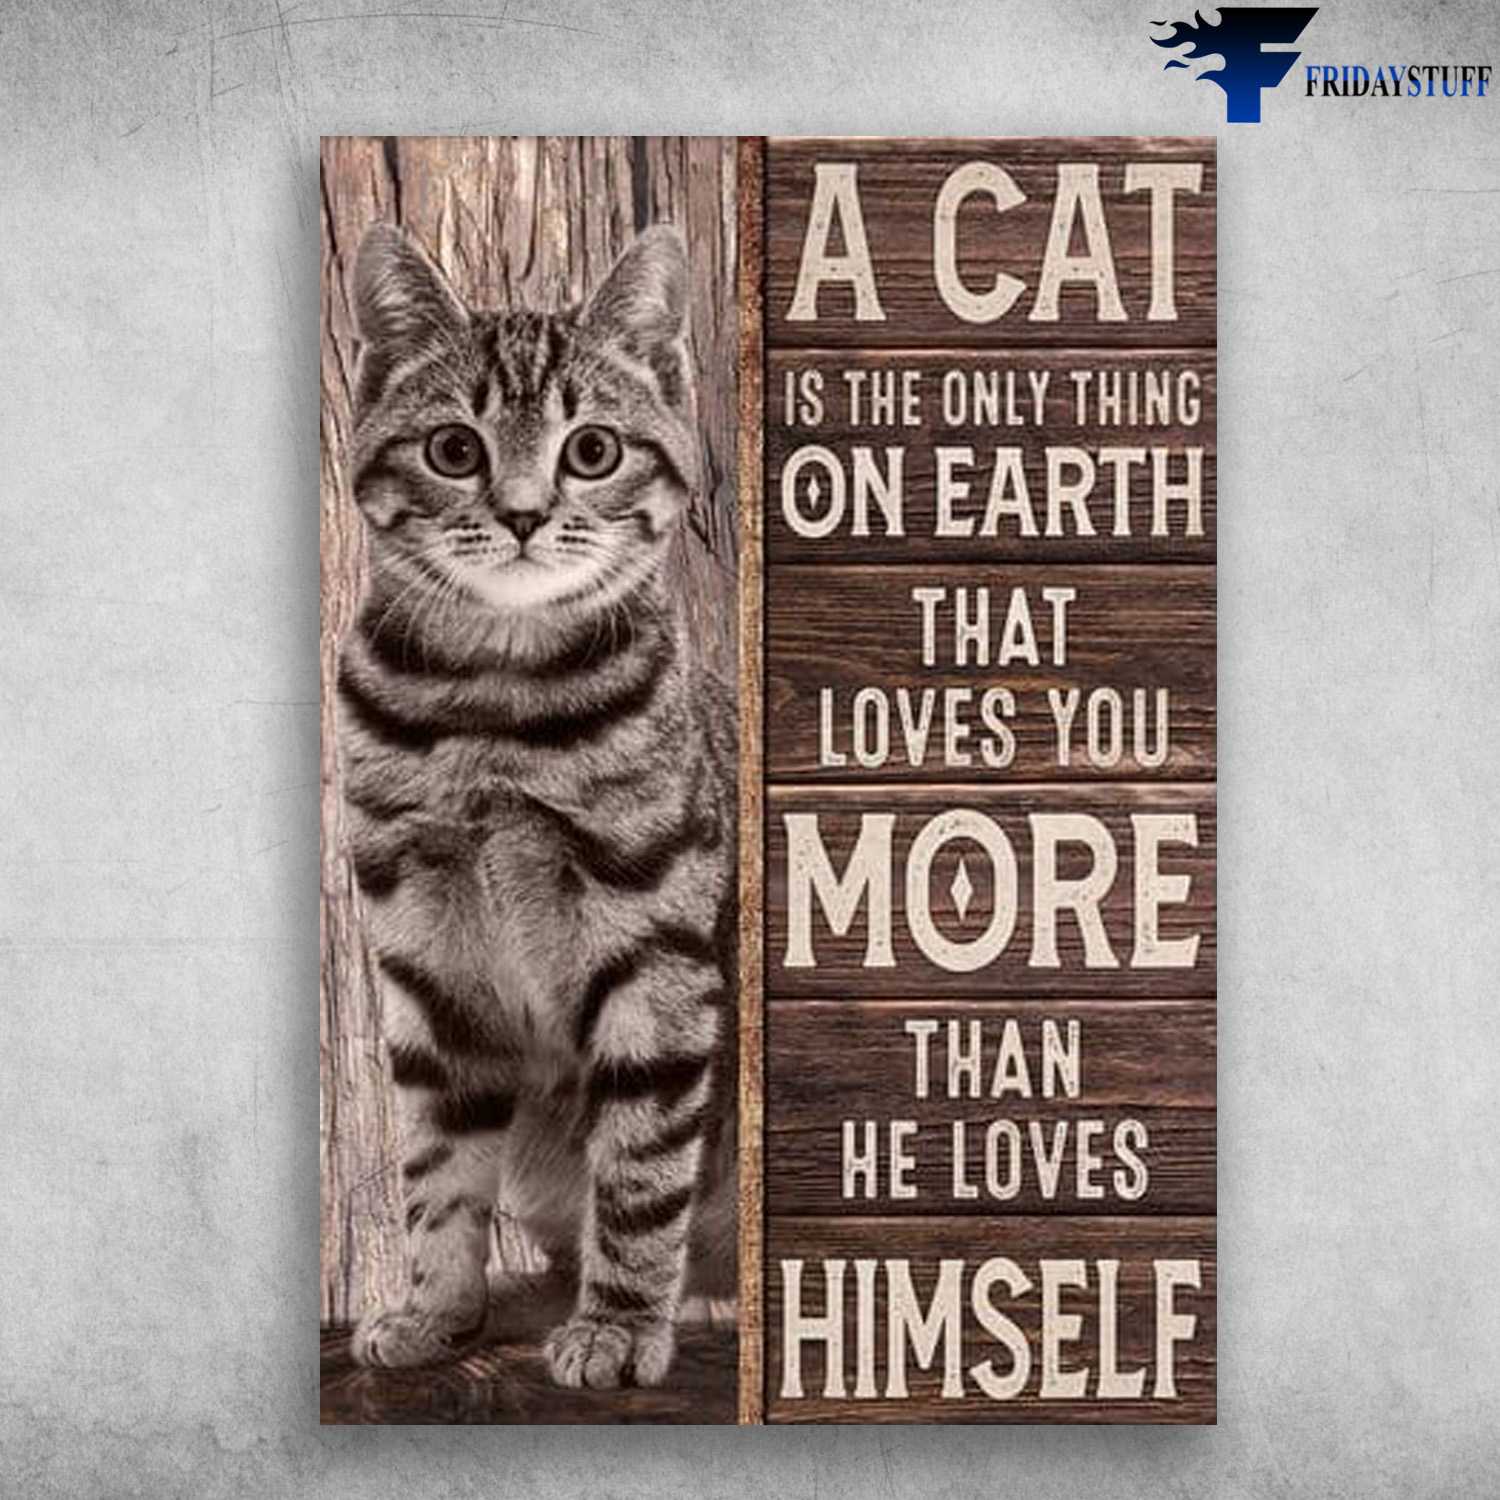 Cat Poster, Cat Lover, A Cat Is The Only Thing On Earth, That Loves You More Than He Loves Himself